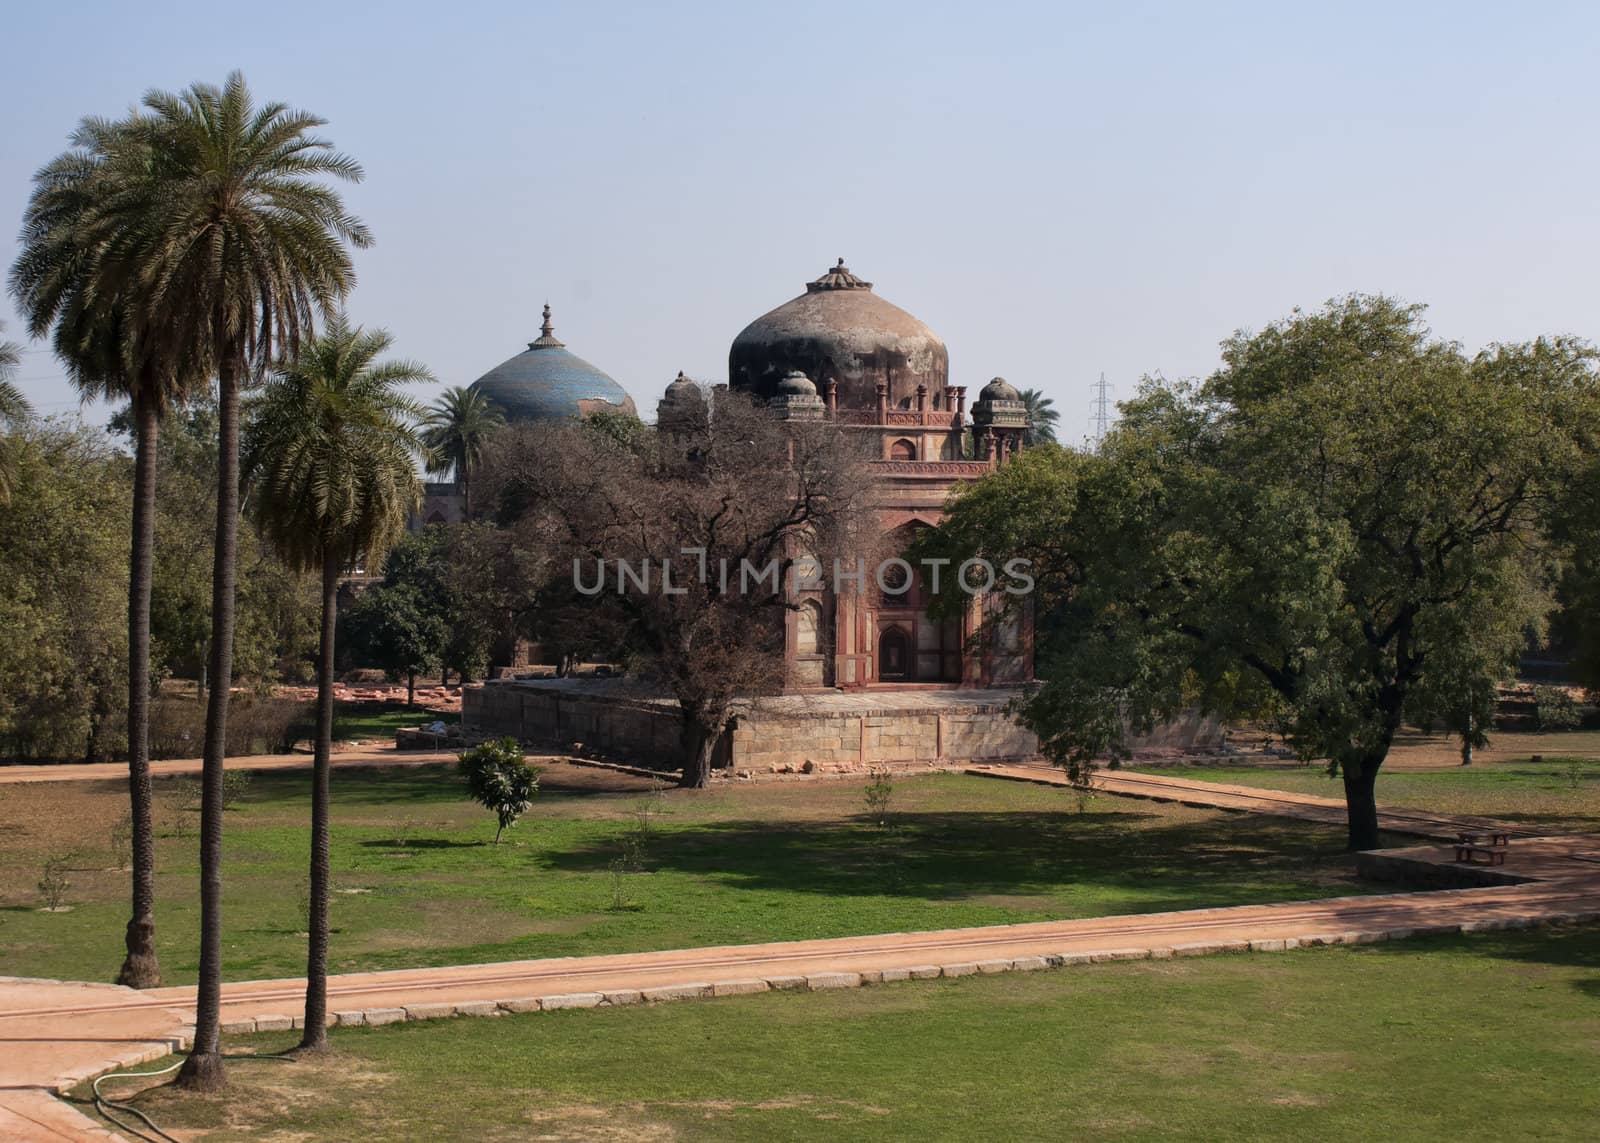 Nlla Gumbad blue dome is actually outside the park.